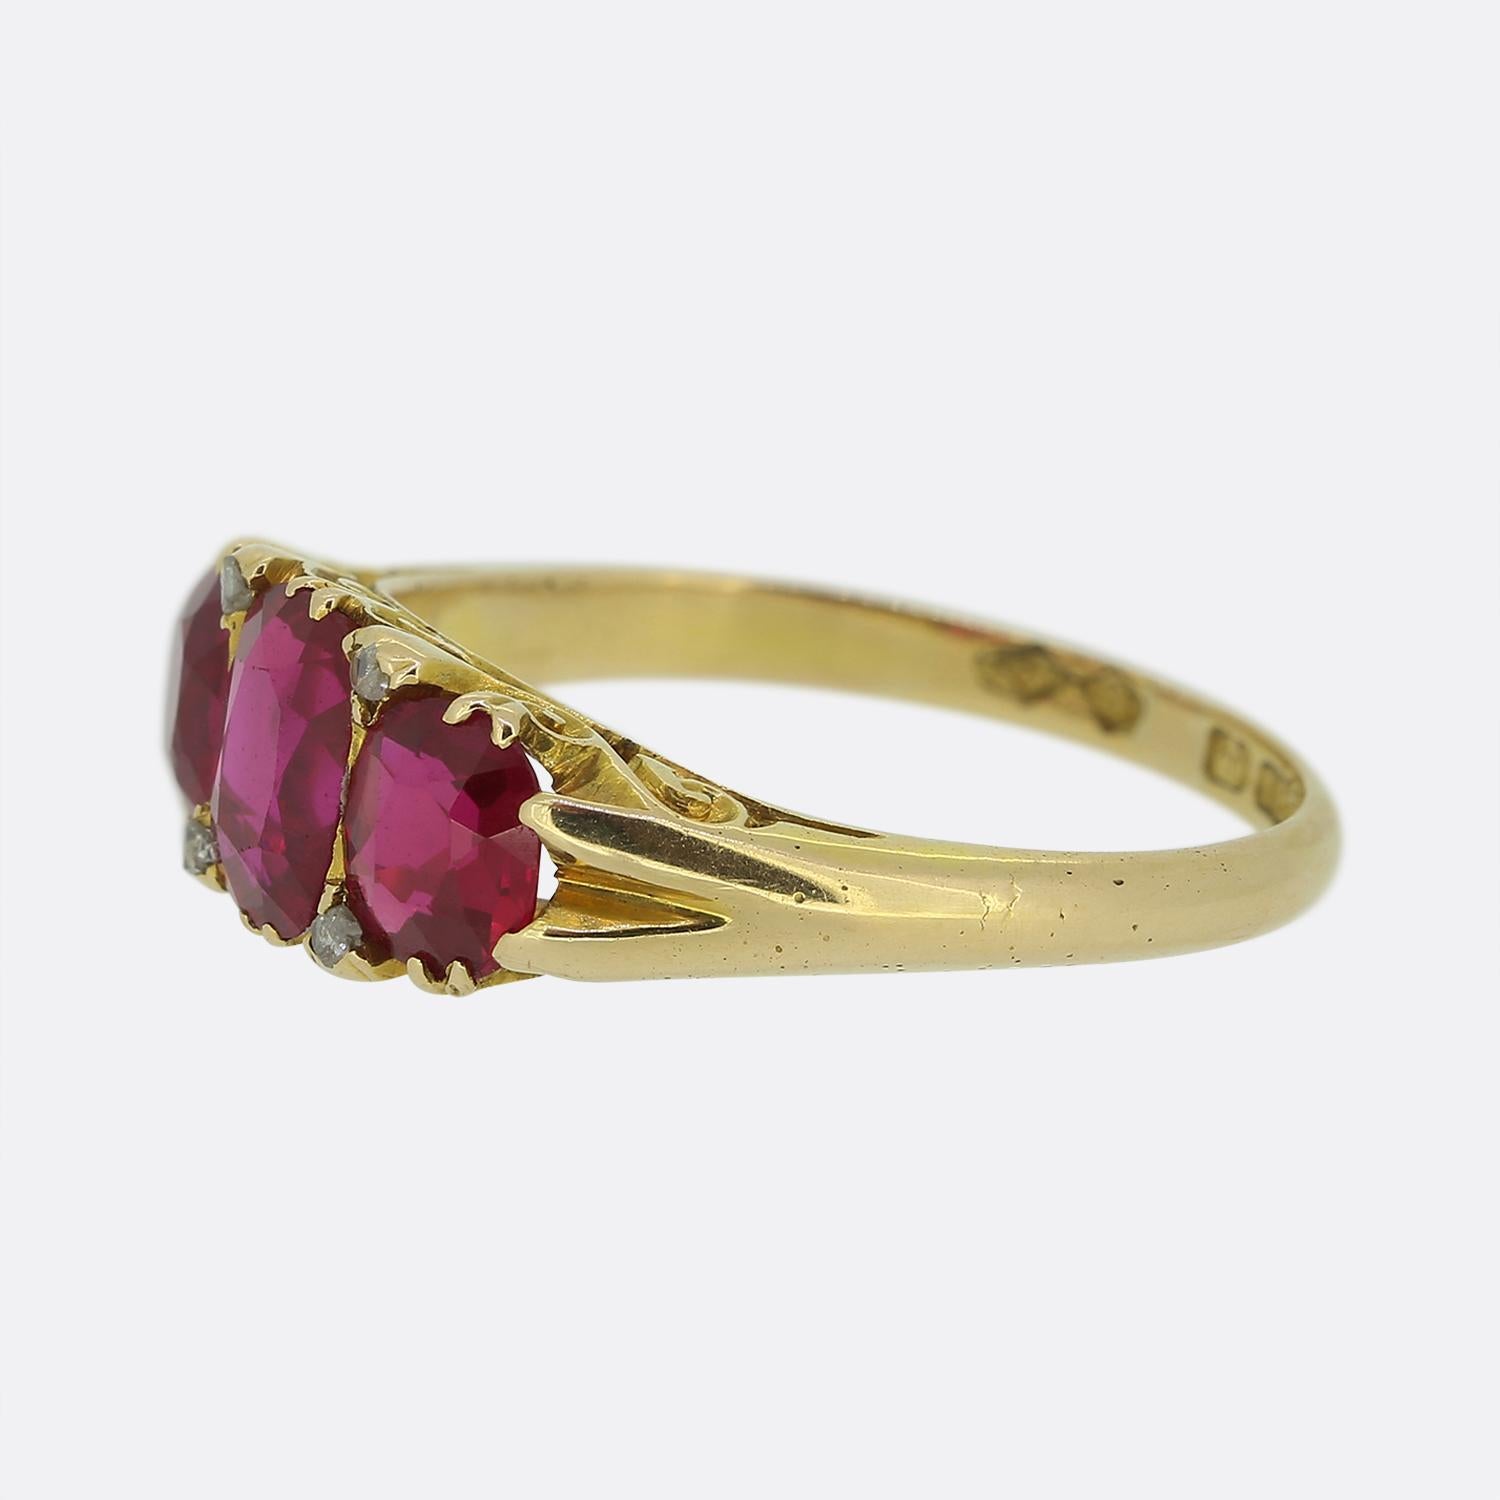 Here we have a lovely 18ct yellow gold Edwardian ruby three stone ring. The ring is exceptionally crafted and the three synthetic rubies have a rich vibrant red hue. The ring is finished with a patterned gallery and rose cut diamond